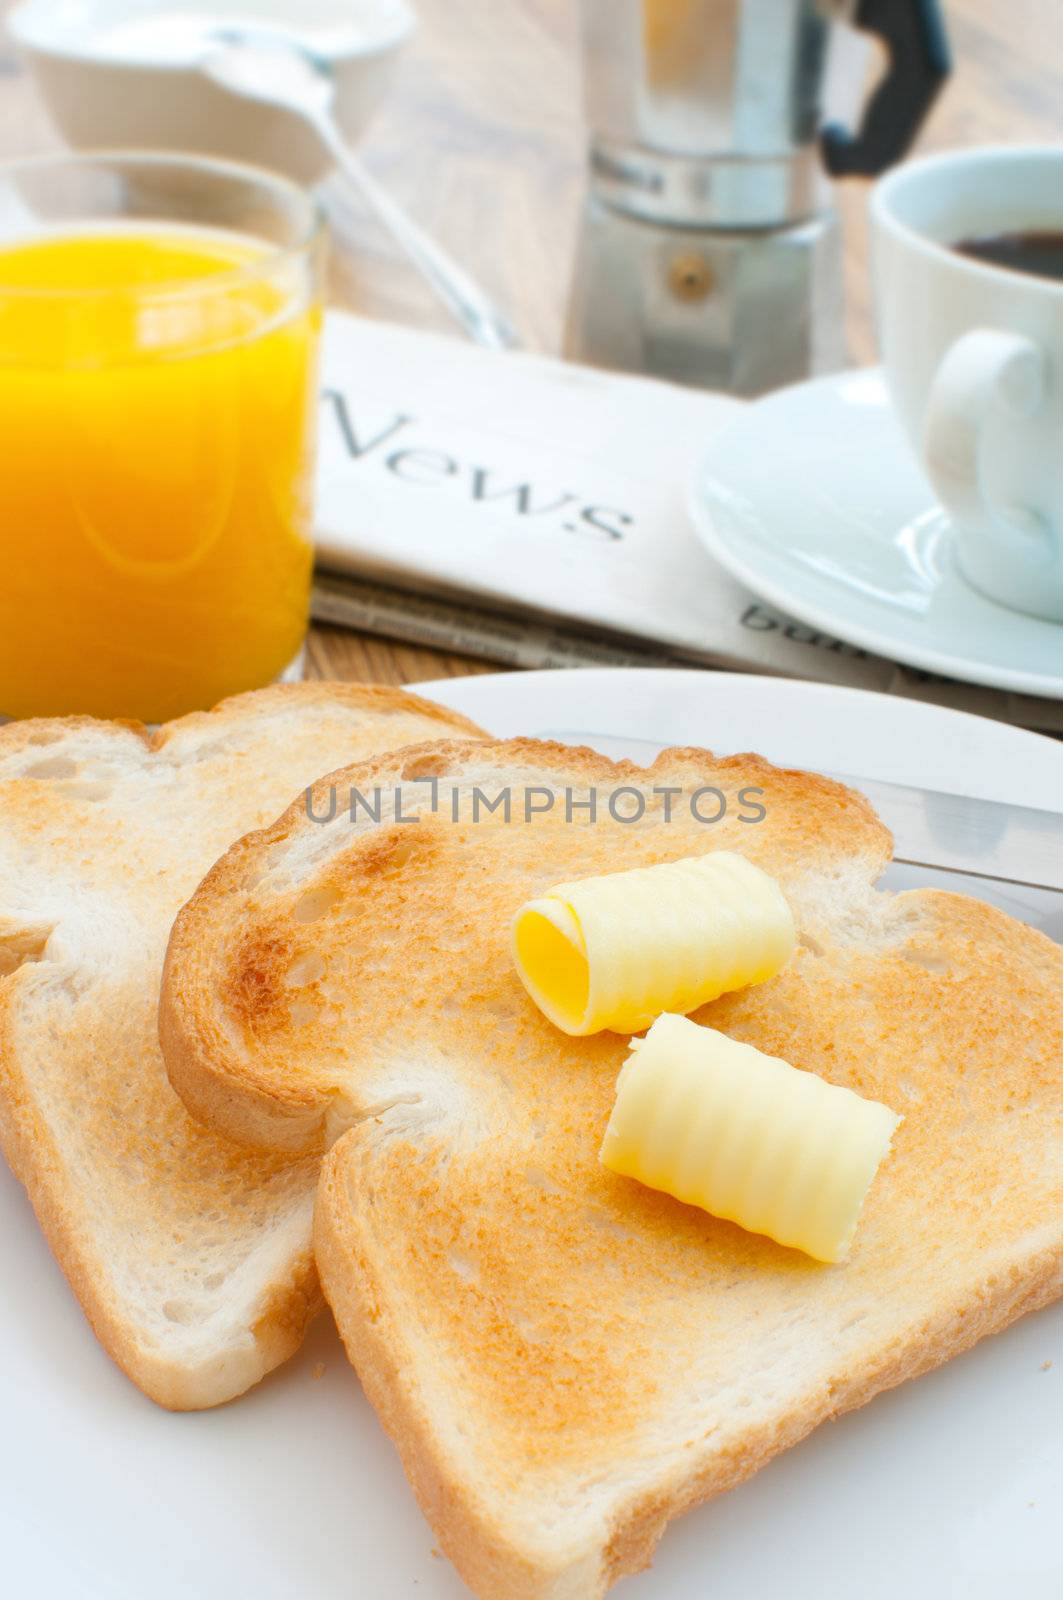 Butter on toast with coffee and newspaper in the background